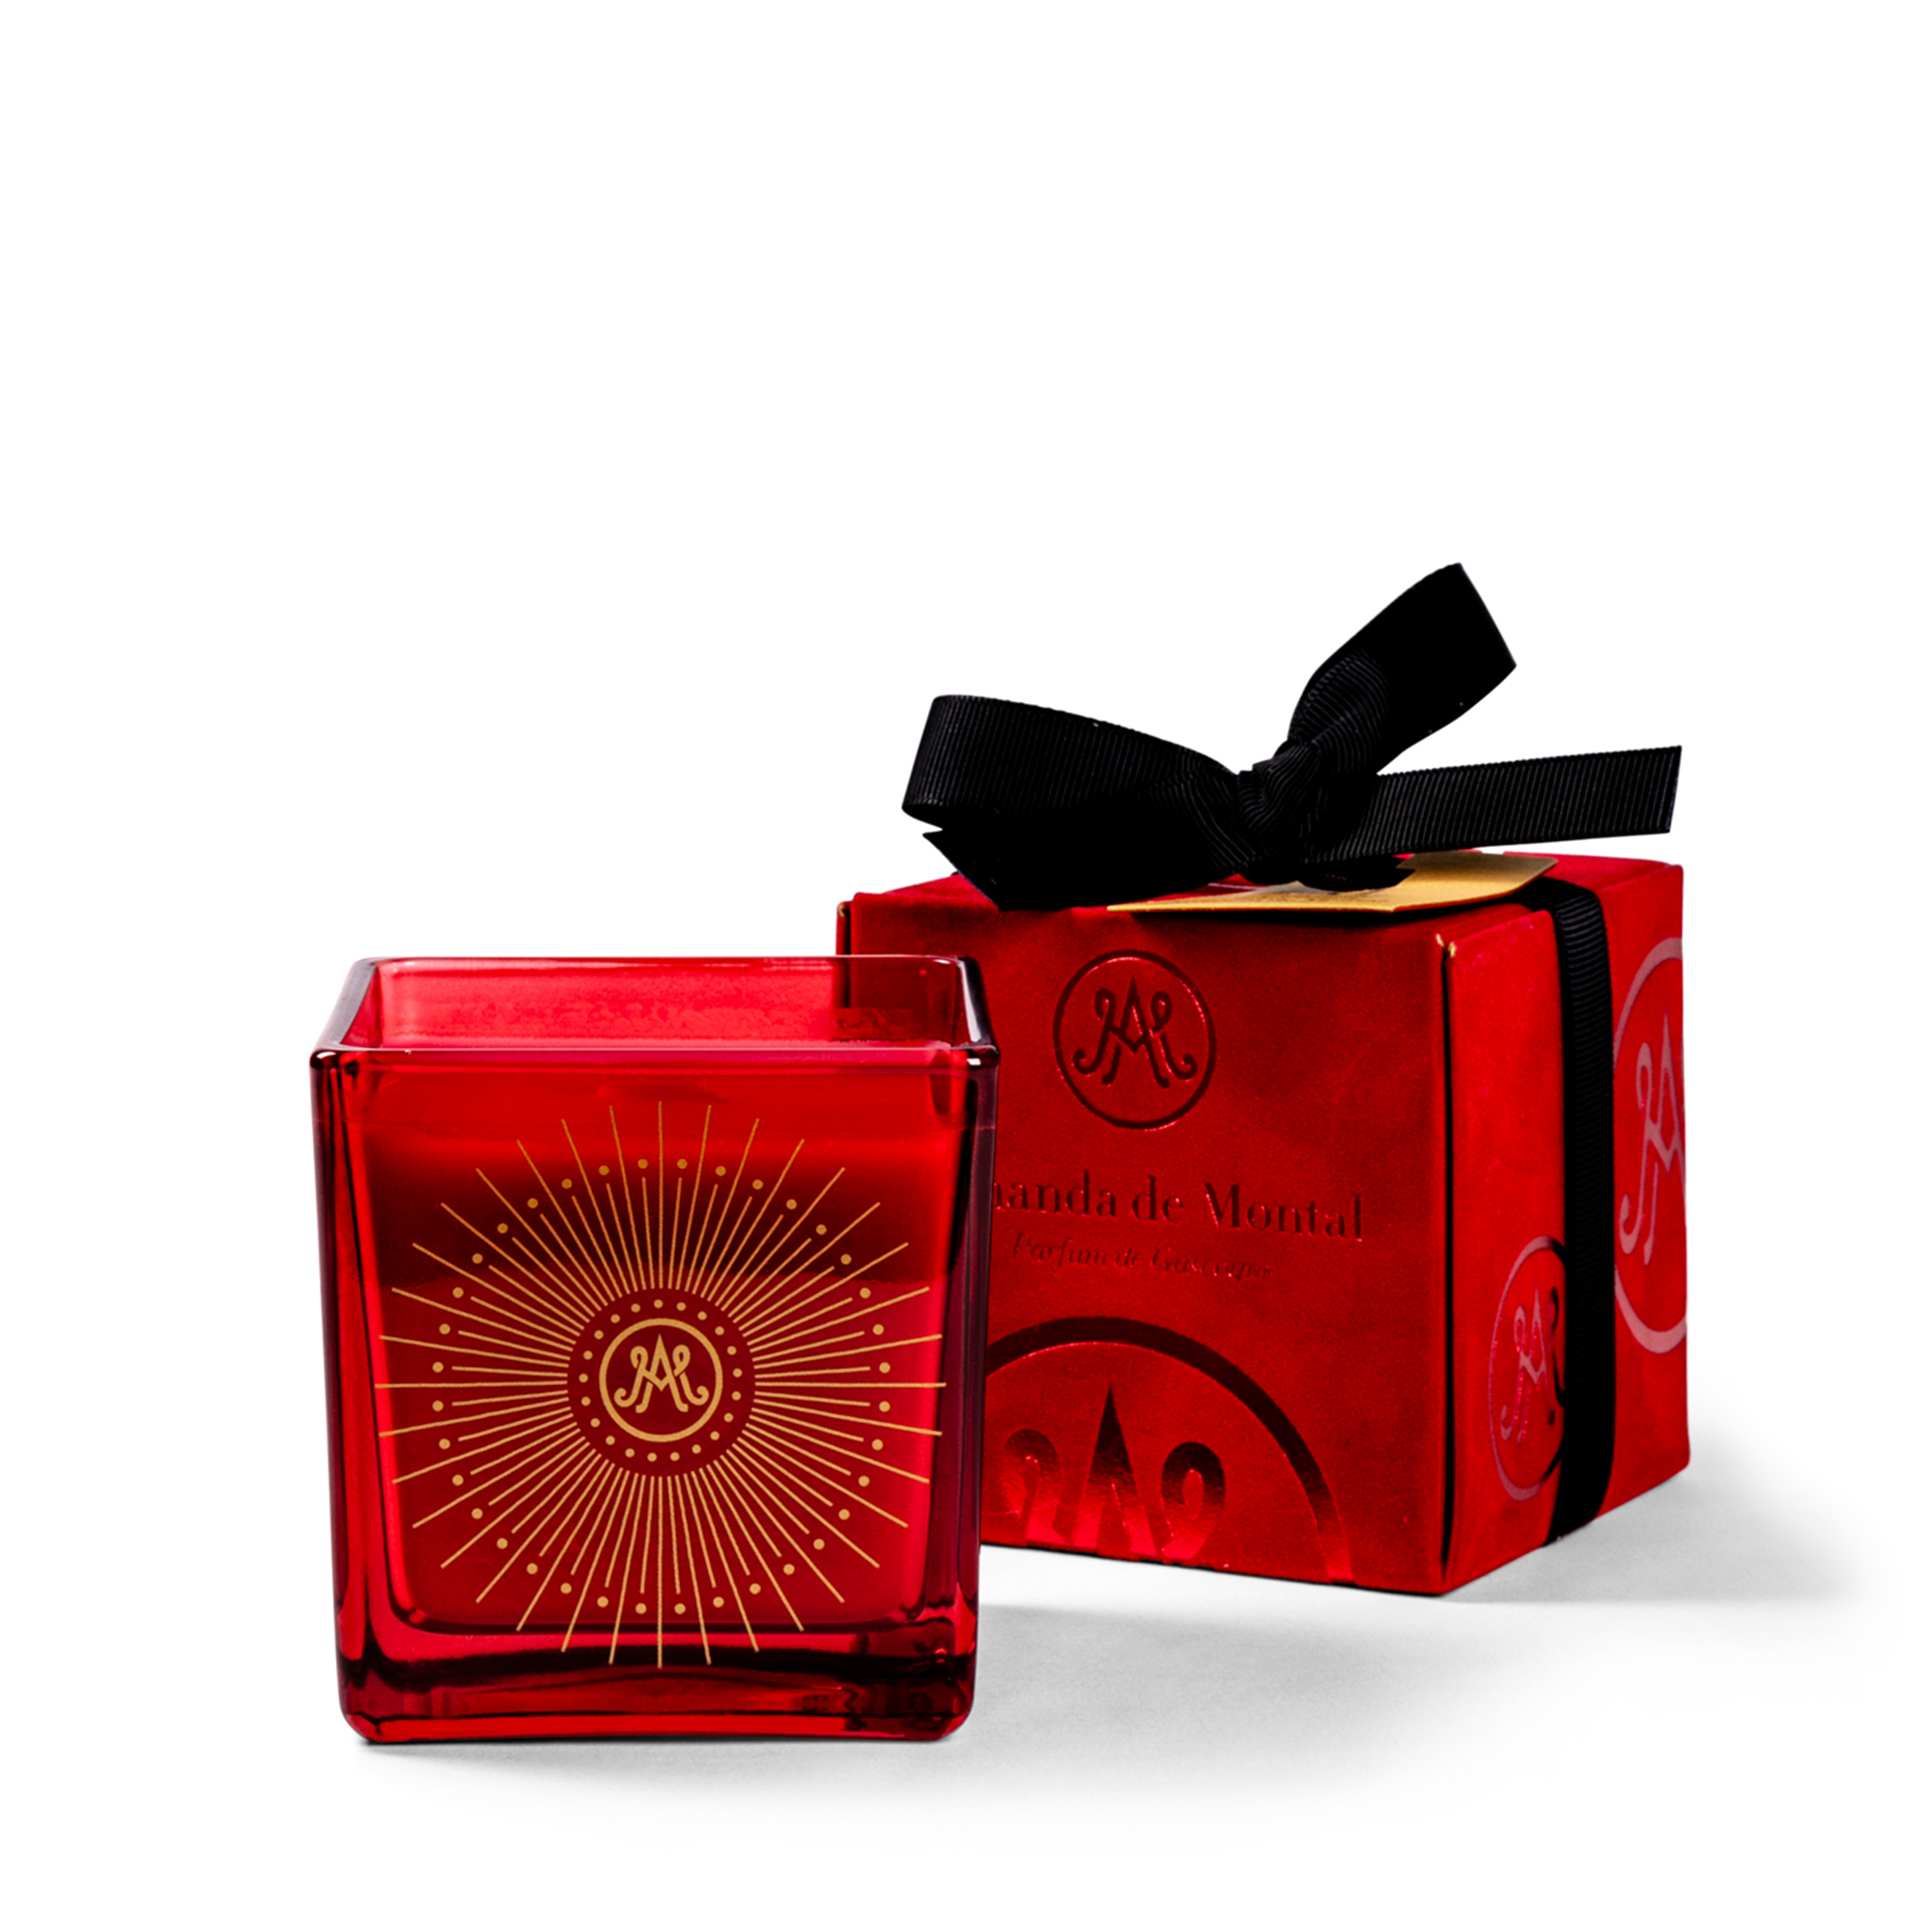 Scented candle with cinnamon, clove, blood orange, vanilla, and musky notes. Presented in an elegant red and gold refillable vessel with a wooden wick, wrapped in a luxurious red velvet box.